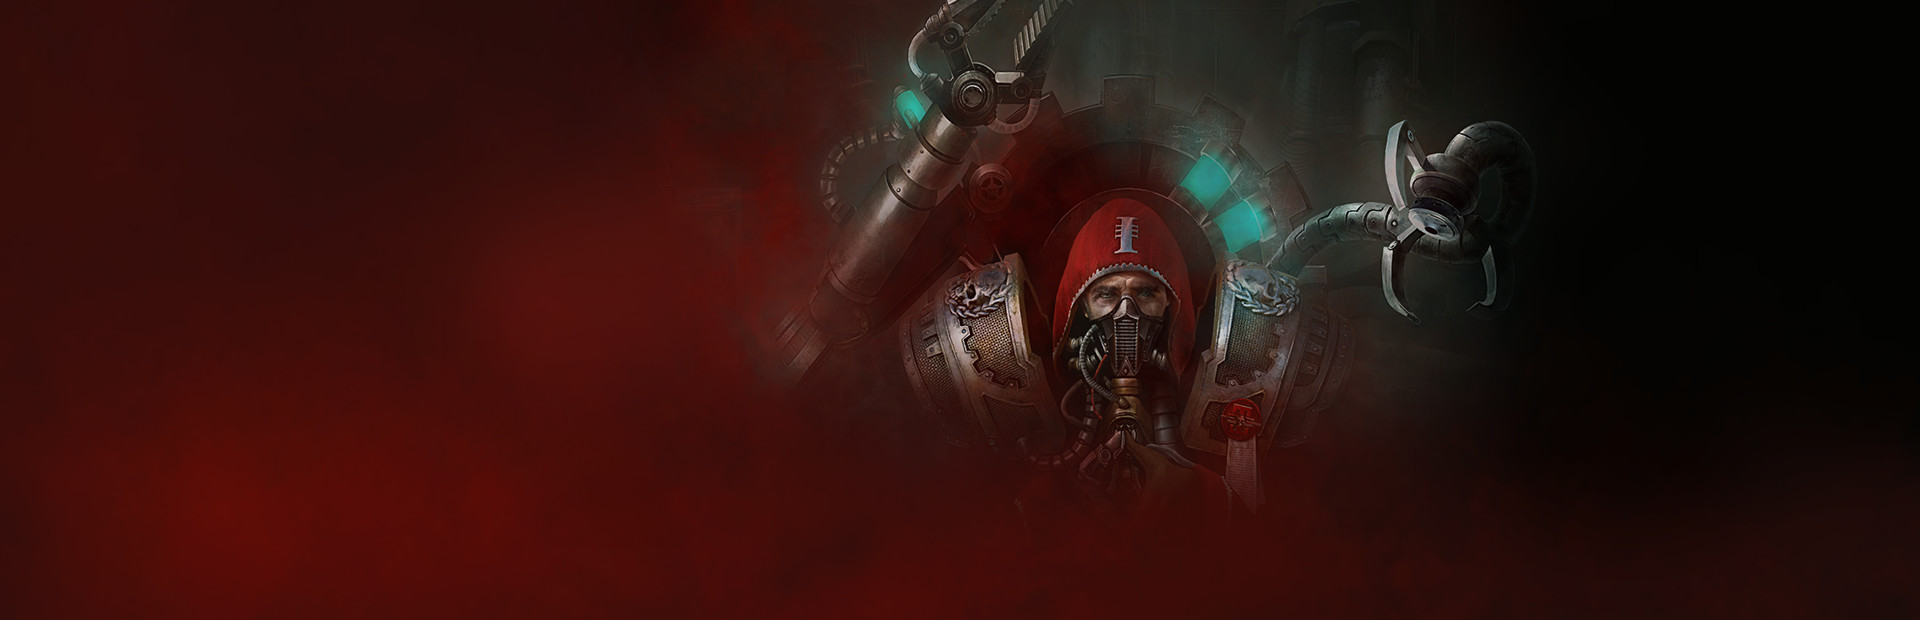 Warhammer 40,000: Inquisitor - Prophecy cover image